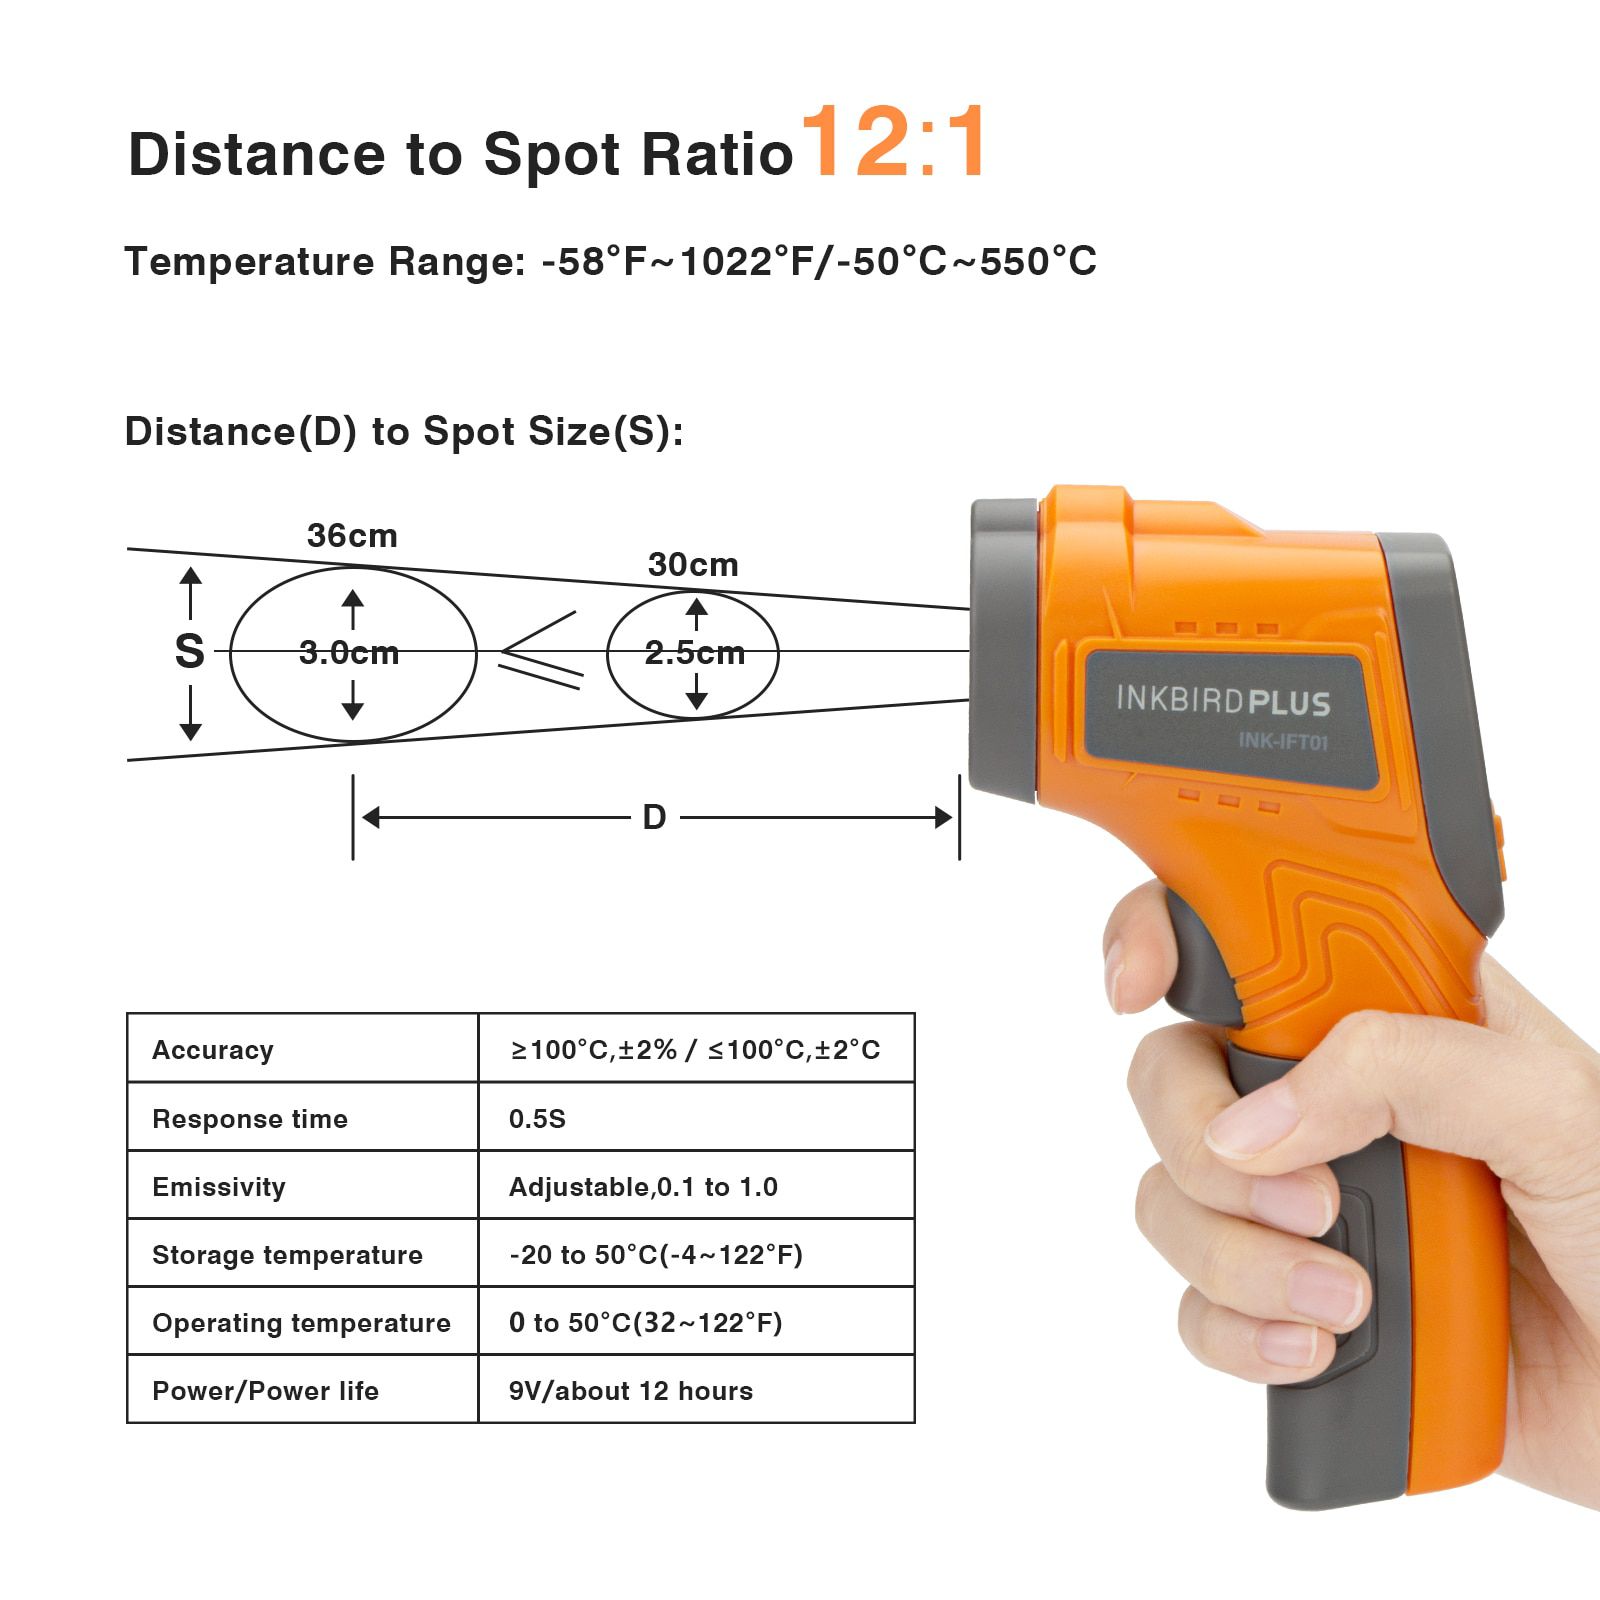 INK-IFT01 Laser Infrared Thermometer Non-Contact Digital Temperature Gun Instant Read Thermometer for Industrial&Kitchen